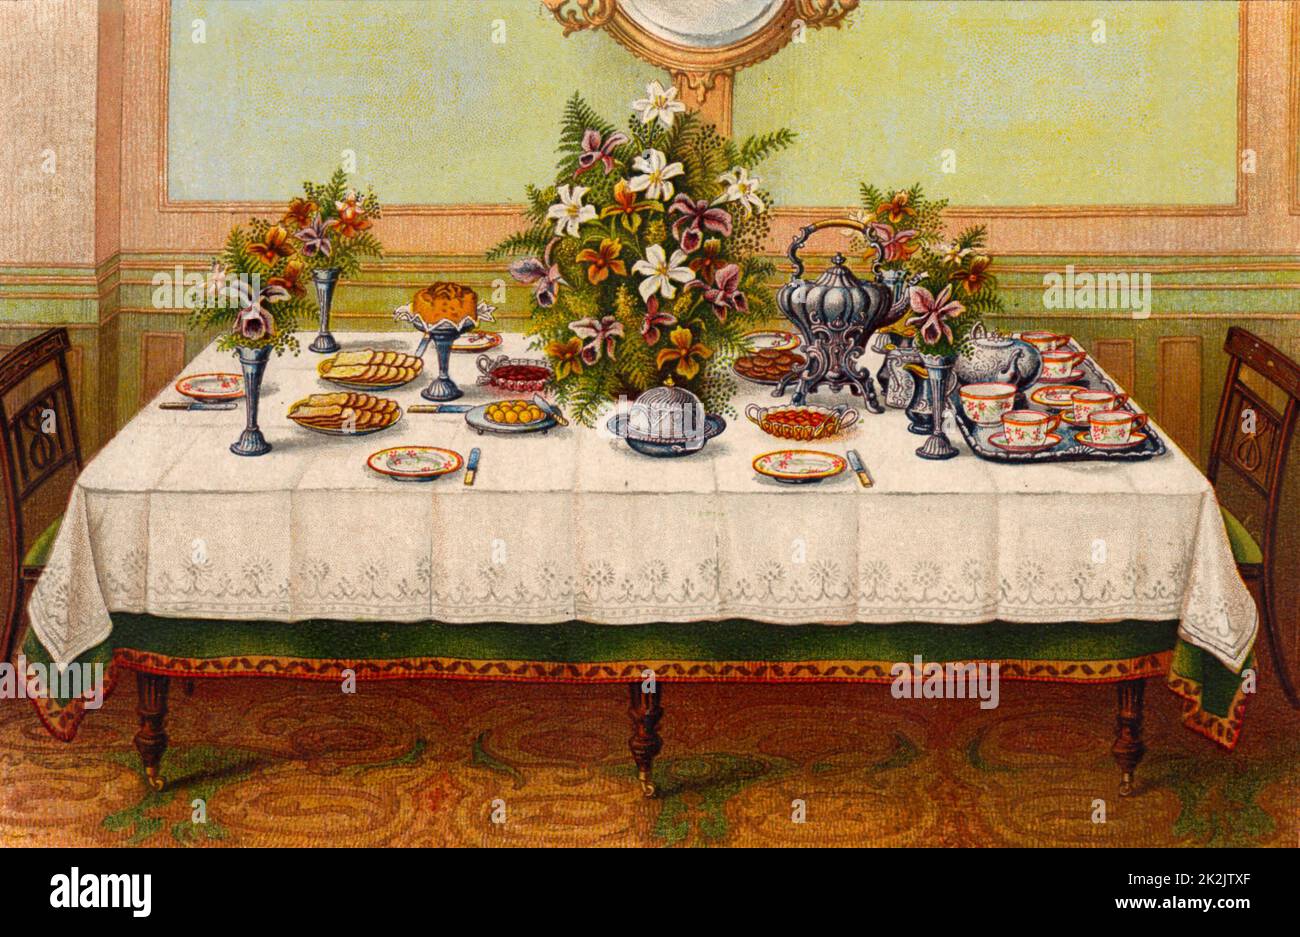 Table covered with a linen cloth and set for Afternoon Tea. A tea kettle on a stand with a spirit heater under it is placed near the teapot. Oleograph from 'Household Management' by Isabella Beeton (London, 1906). Stock Photo